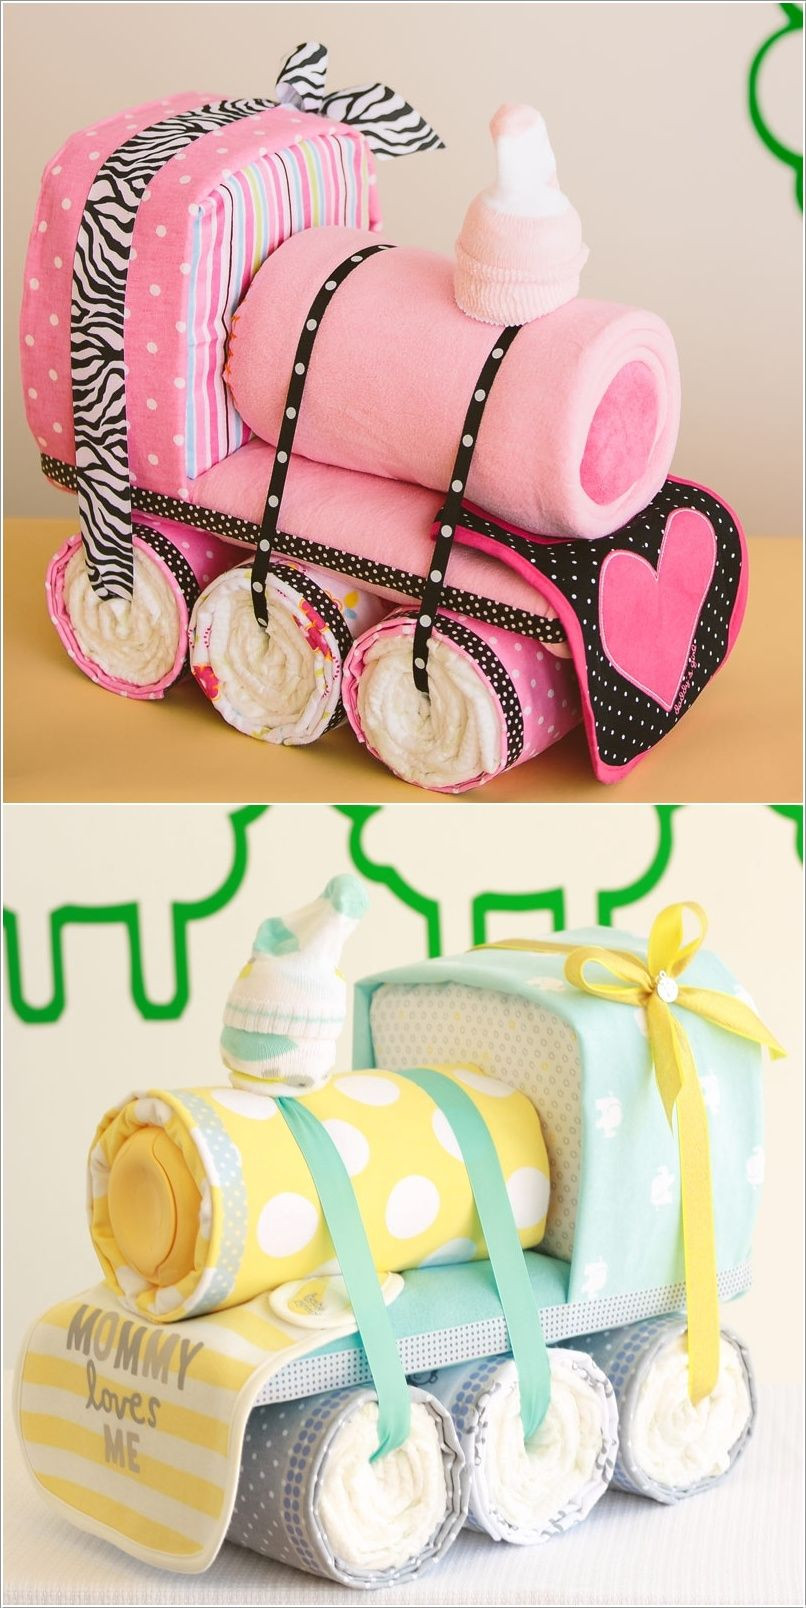 Baby Shower Homemade Gift Ideas
 How Amazing are These Baby Shower Gift Ideas